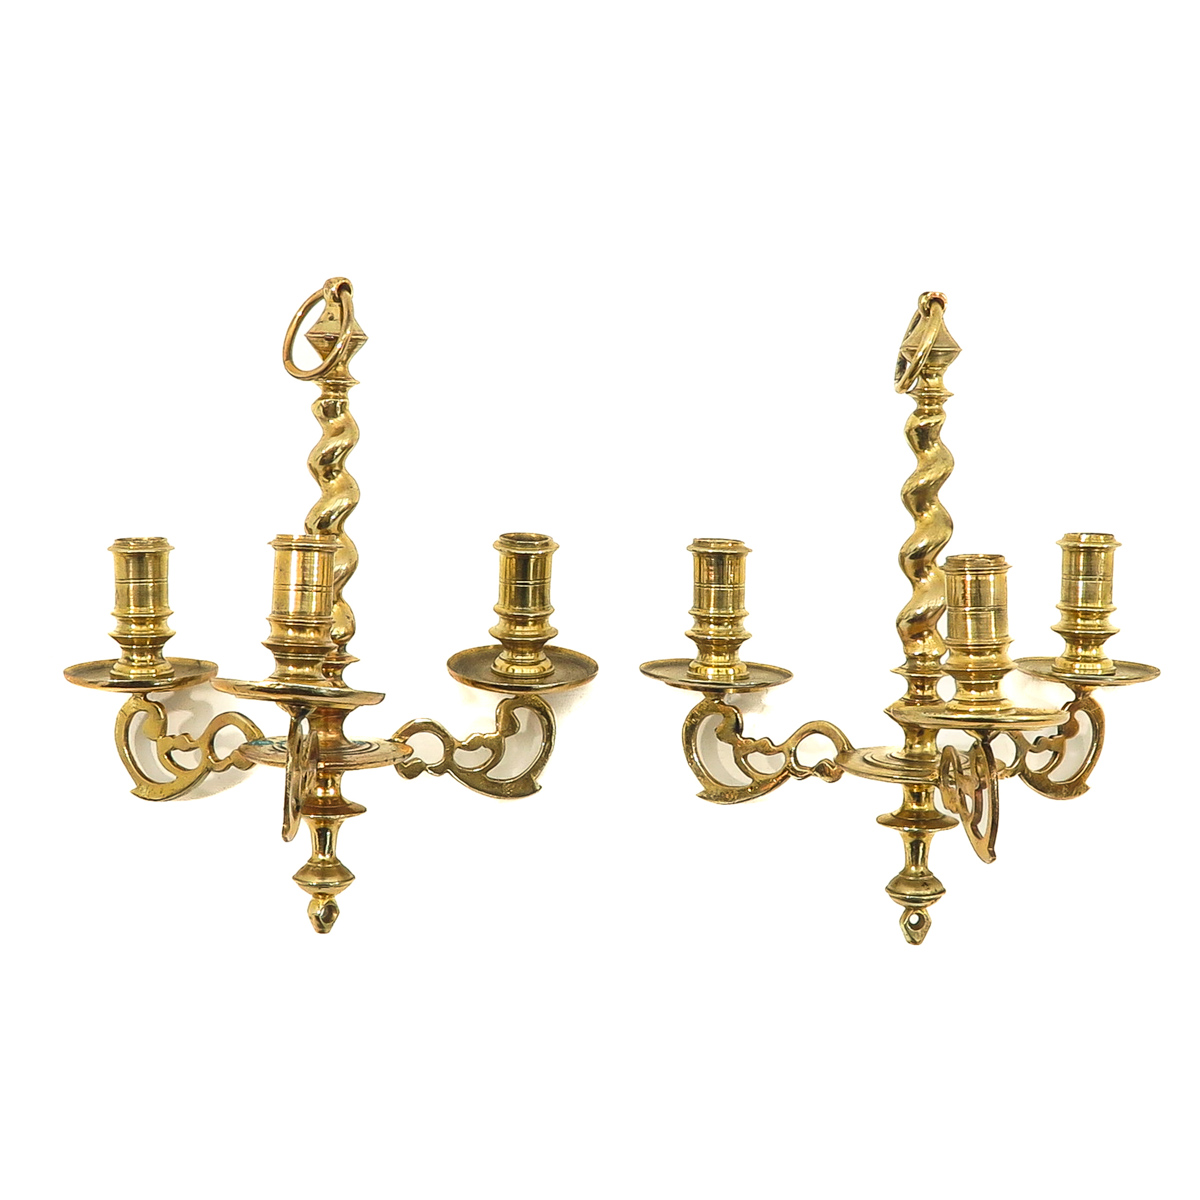 A Pair of 17th Century Candle Chandeliers - Image 3 of 8